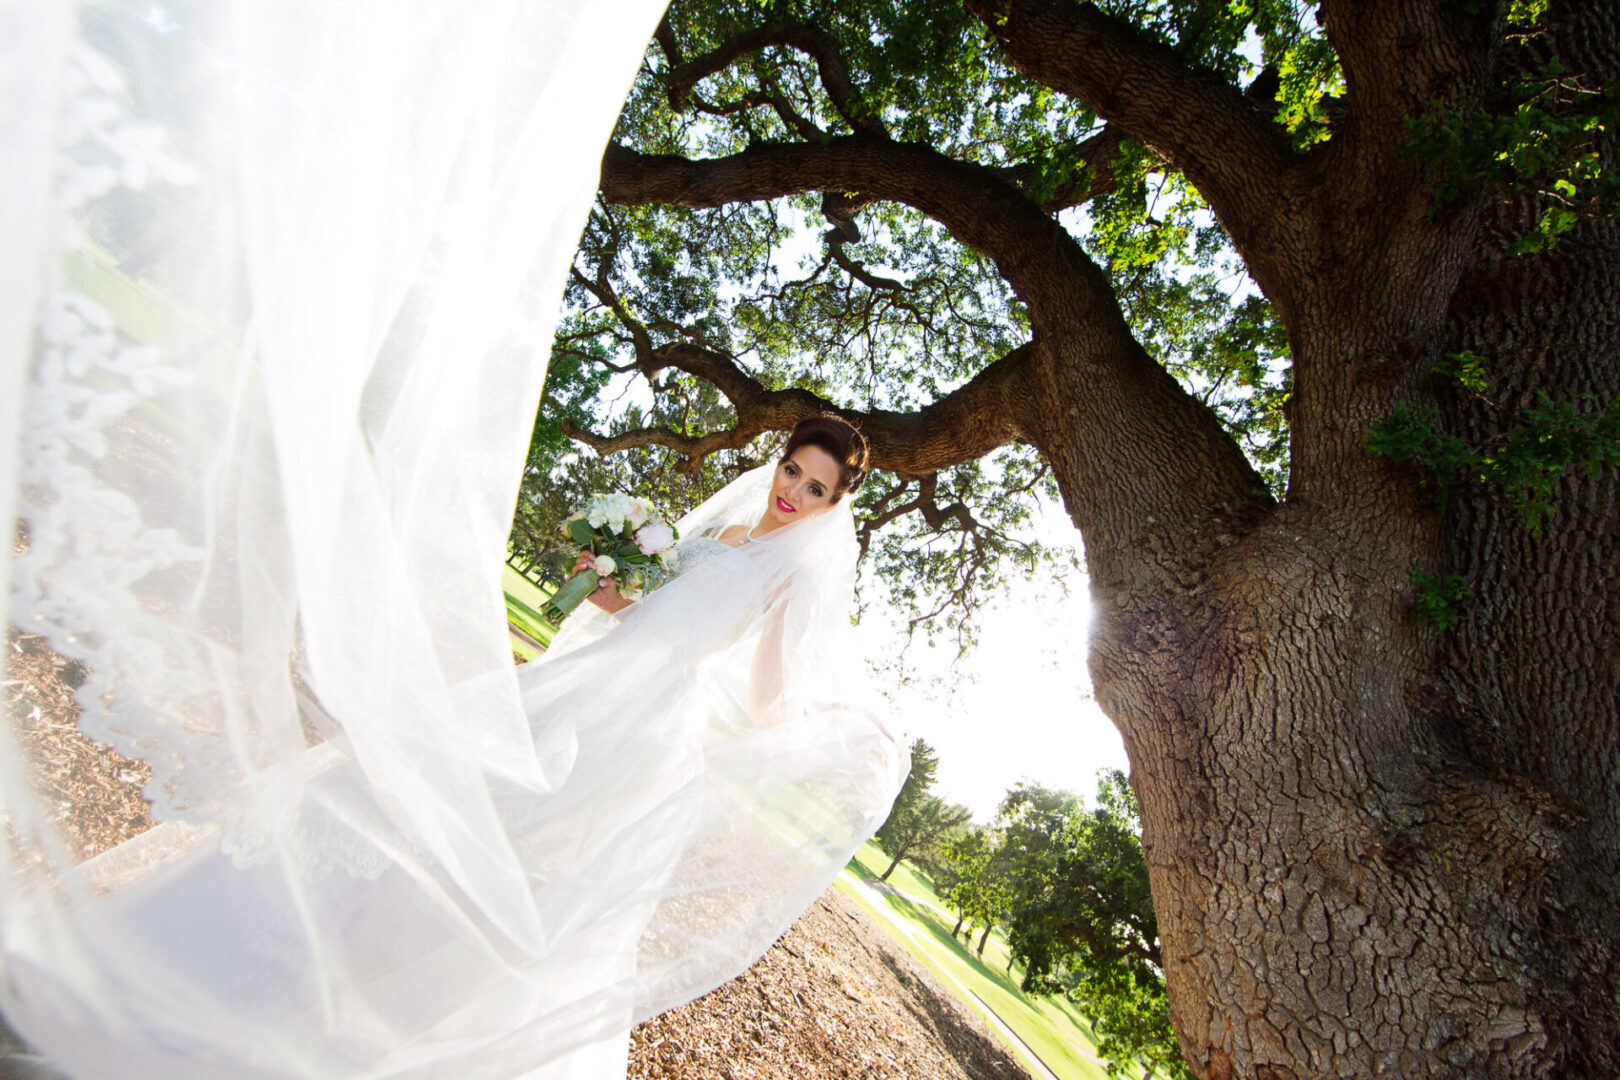 A bride wearing a white color dress in a ground